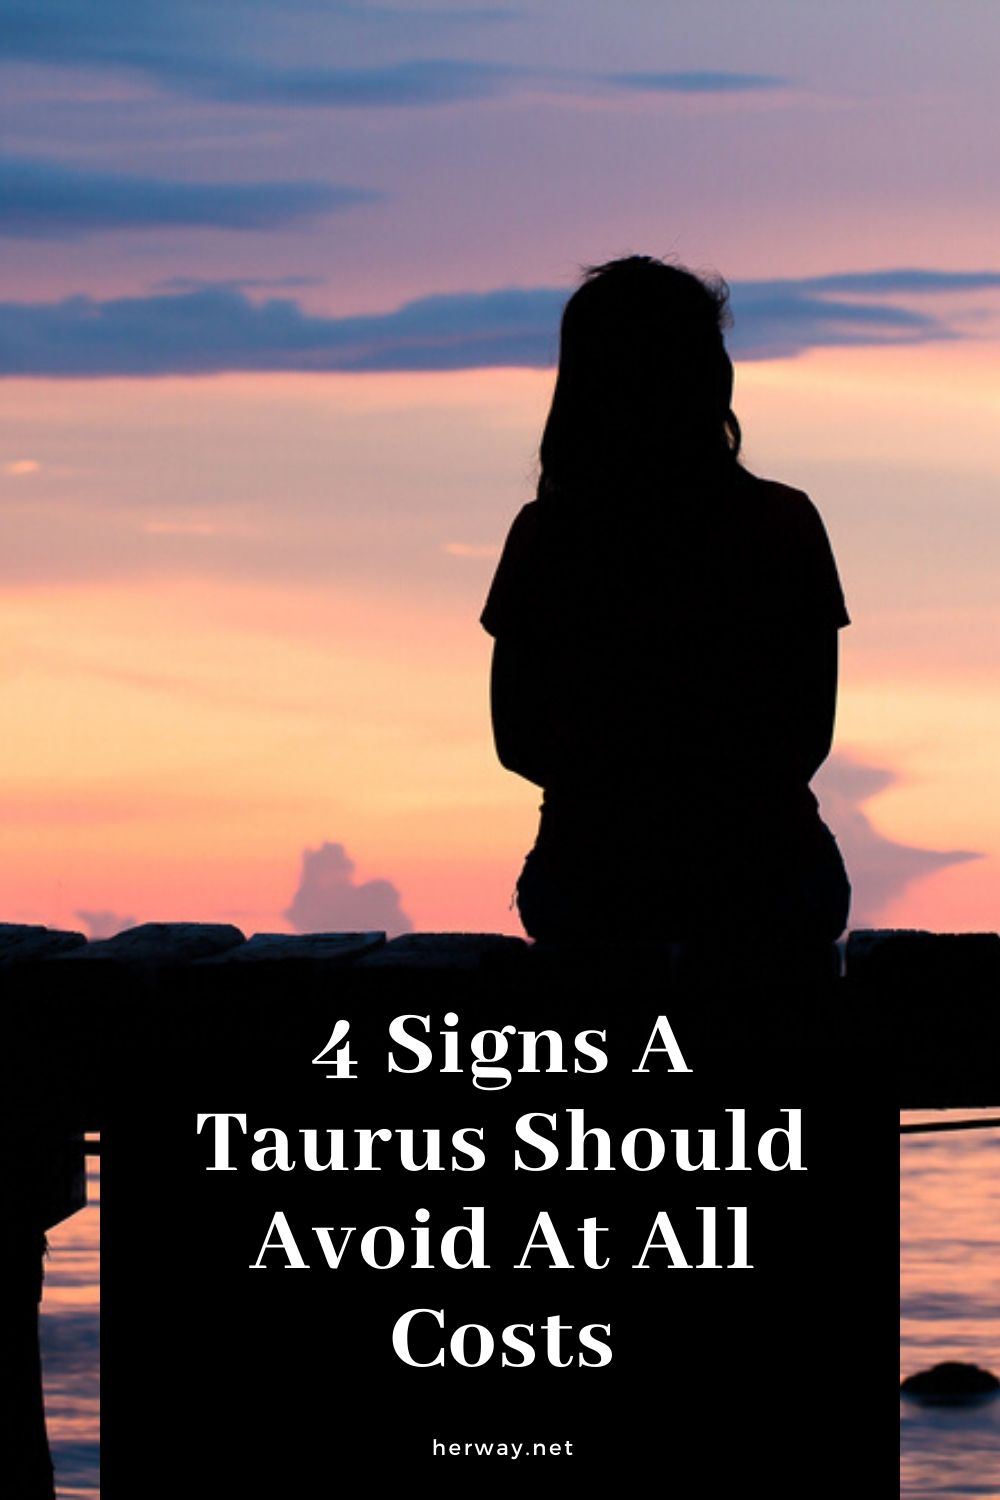 4 Signs A Taurus Should Avoid At All Costs